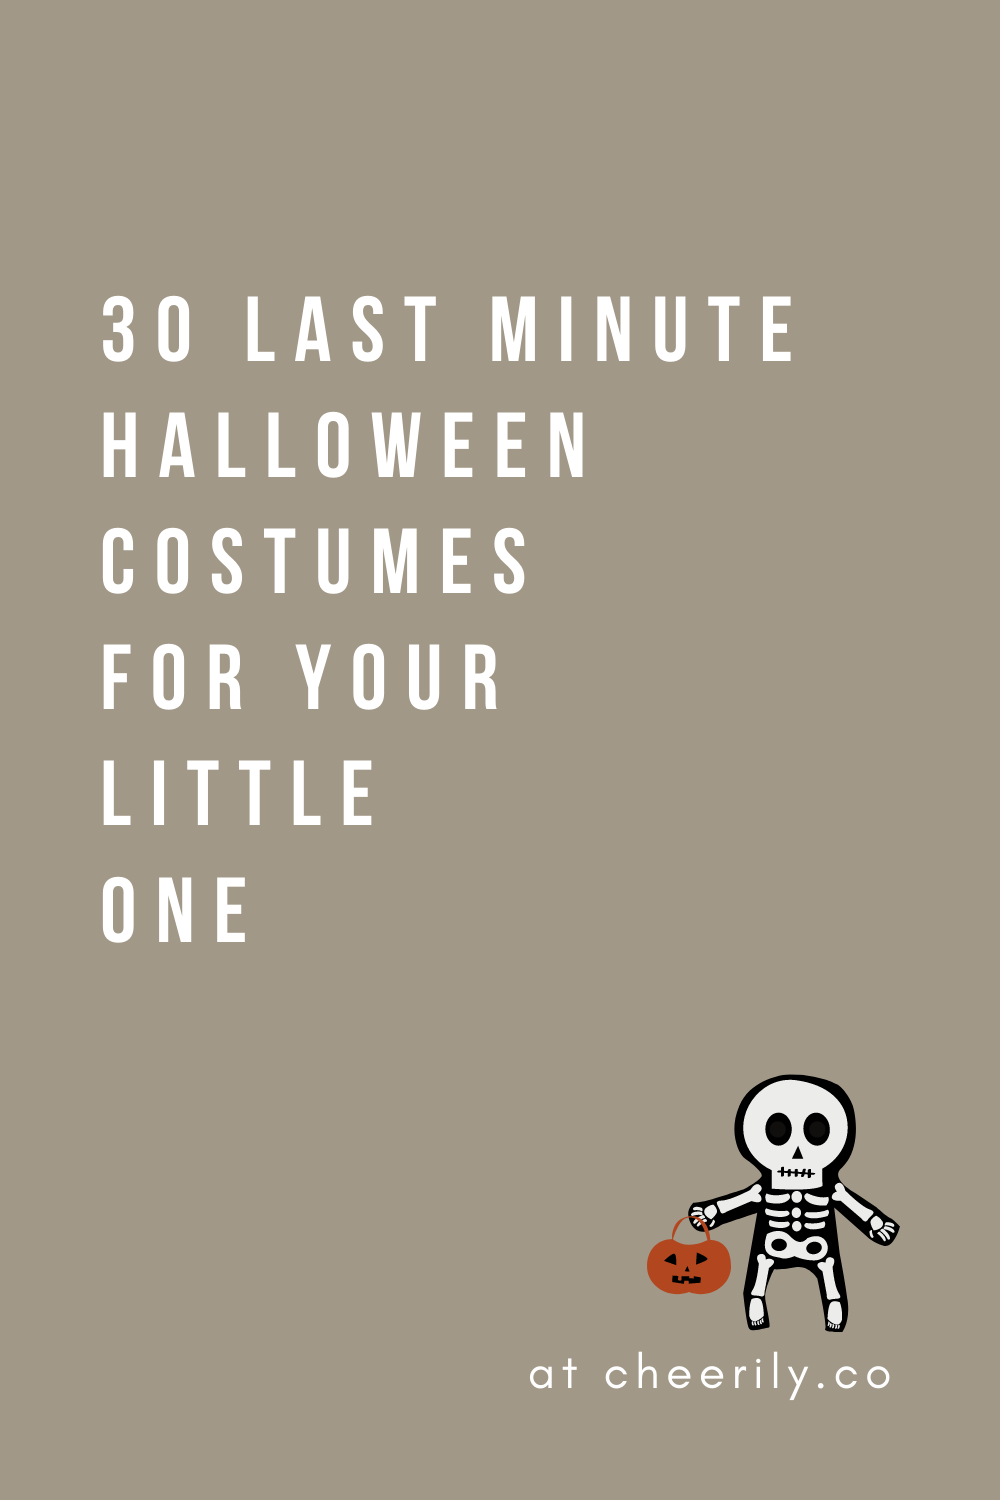 30 LAST MINUTE HALLOWEEN COSTUMES FOR YOUR LITTLE ONE | Cheerily